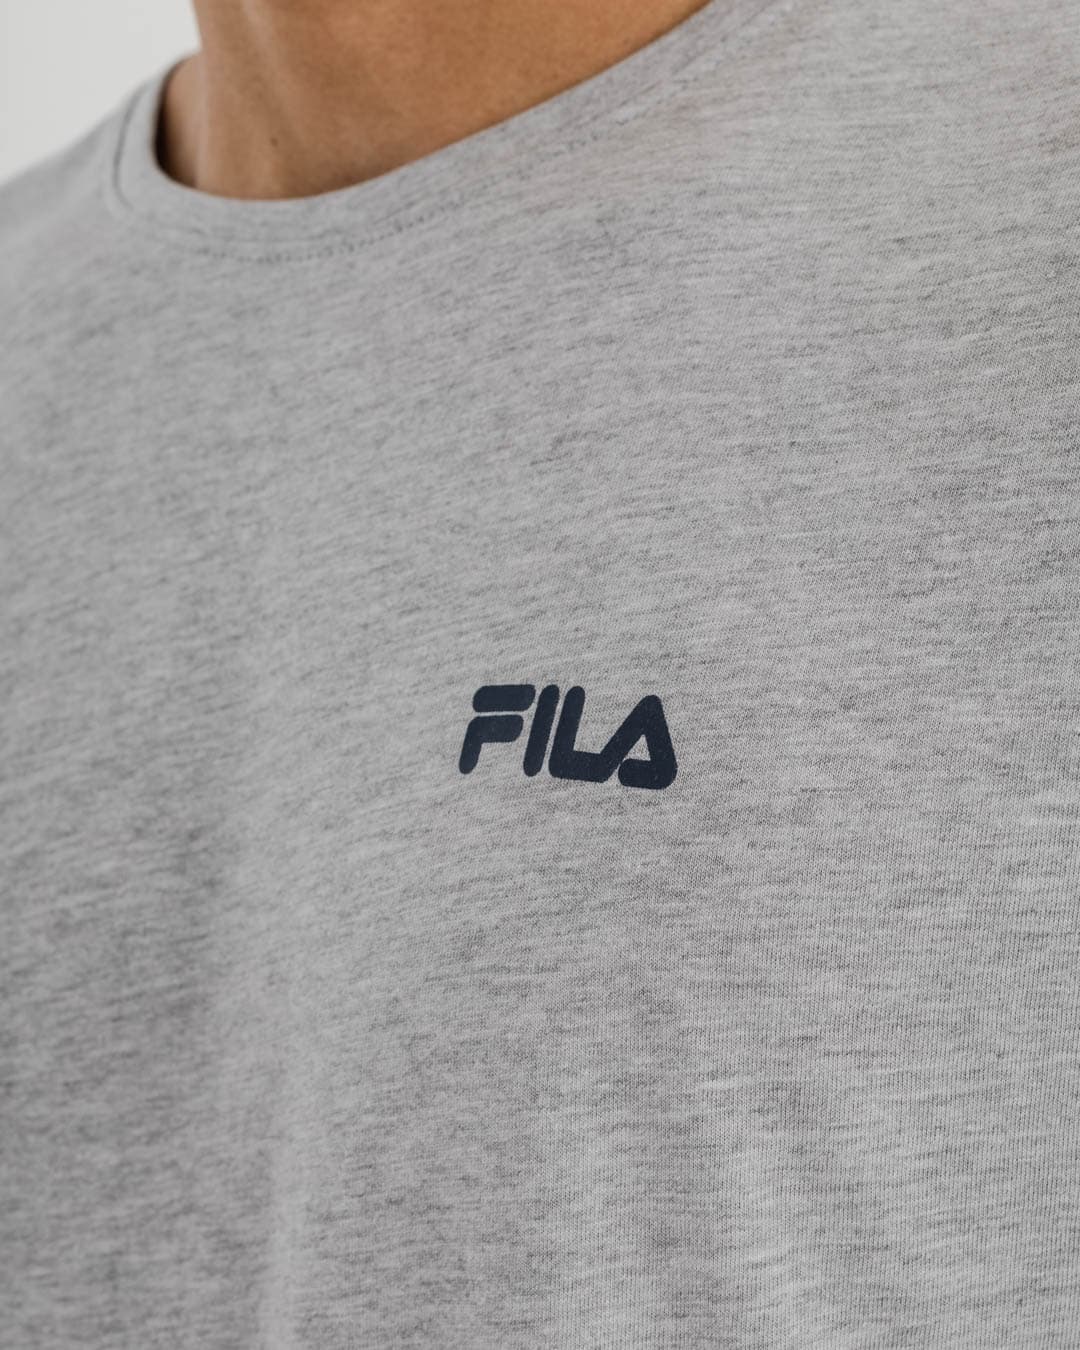 close up of man wearing grey t-shirt with Fila logo on top left